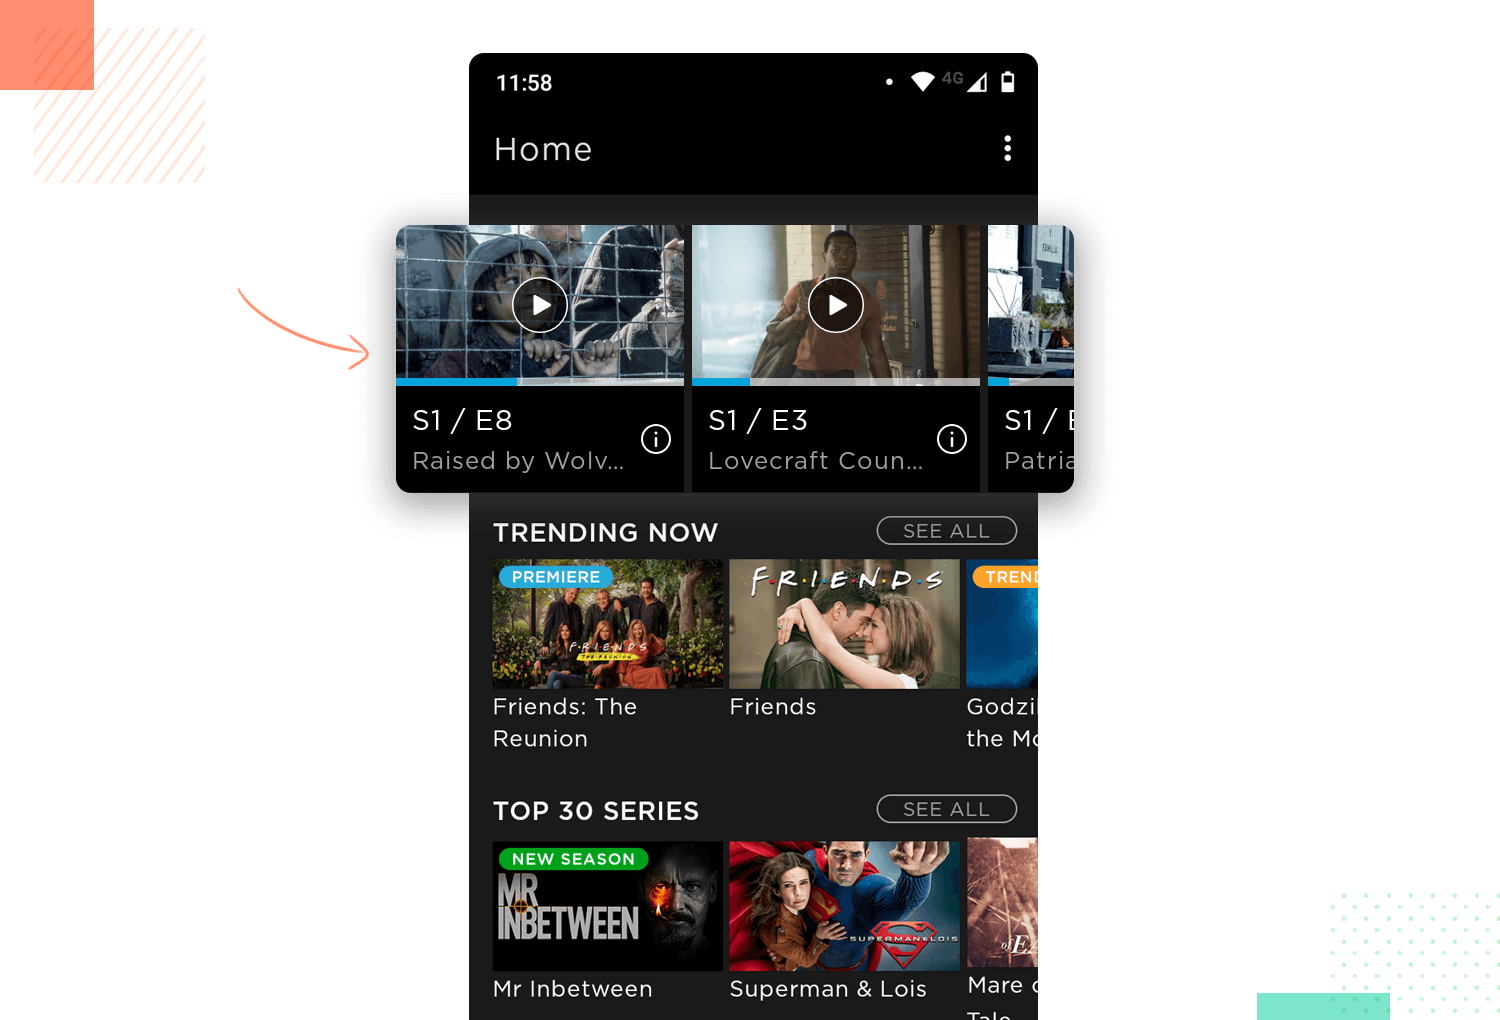 hbo as example of meaningful interactions in ux design